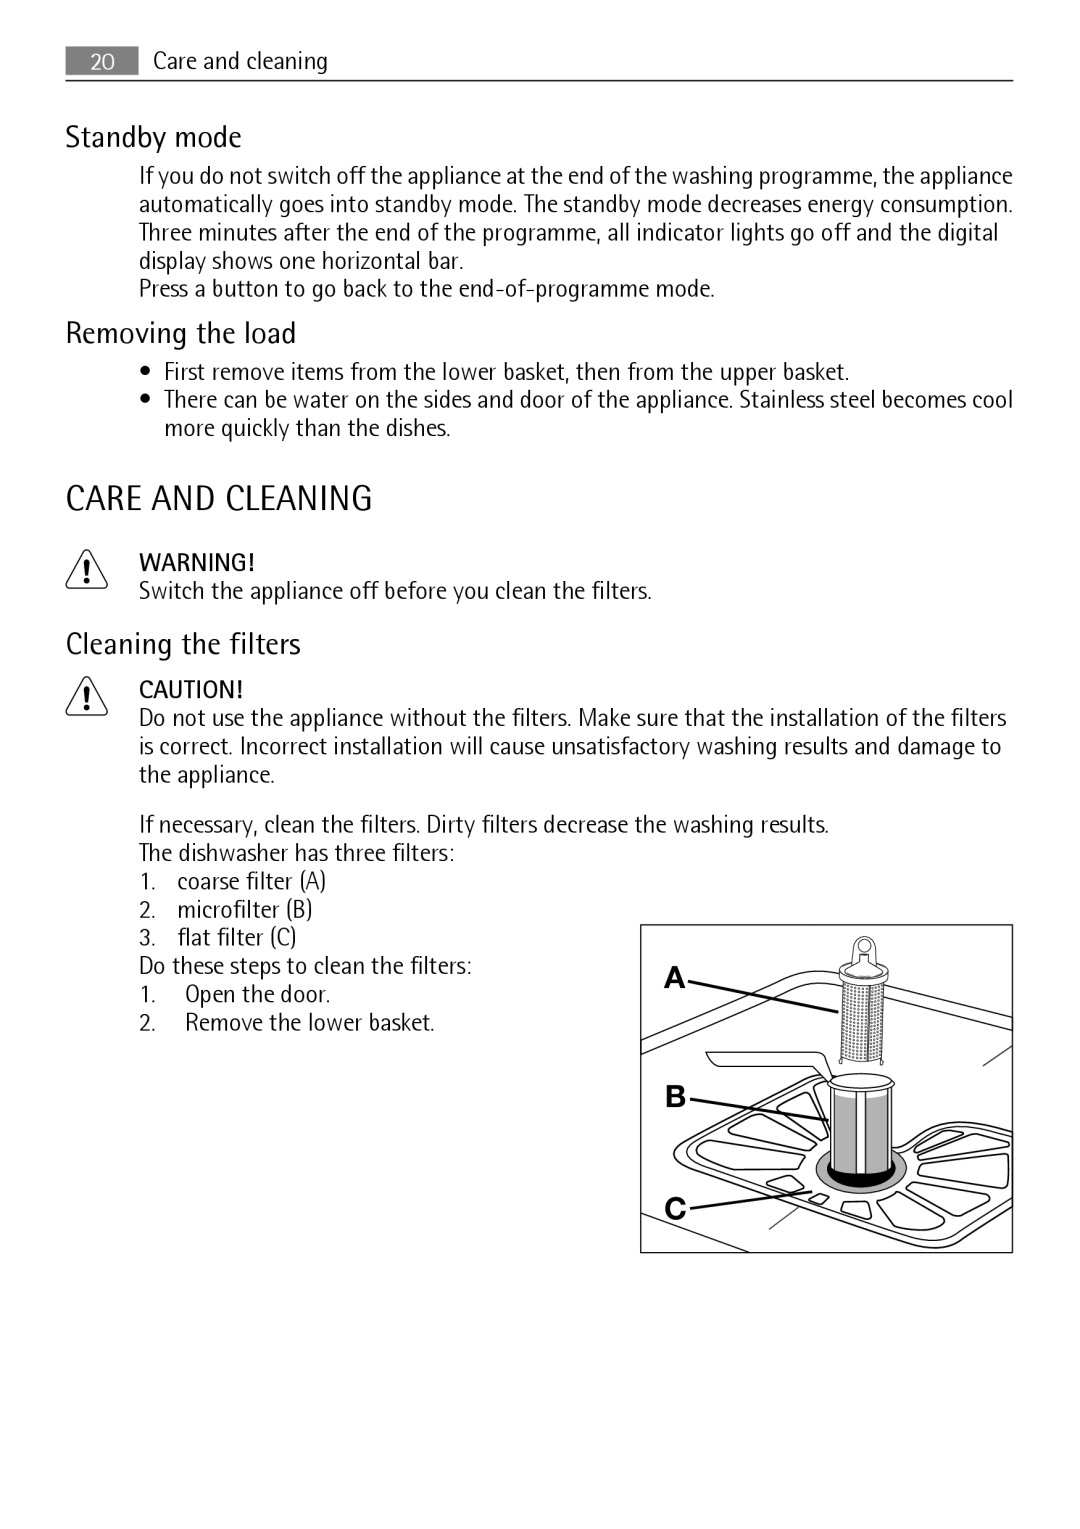 AEG 45003 user manual Care And Cleaning, Standby mode, Removing the load, Cleaning the filters 